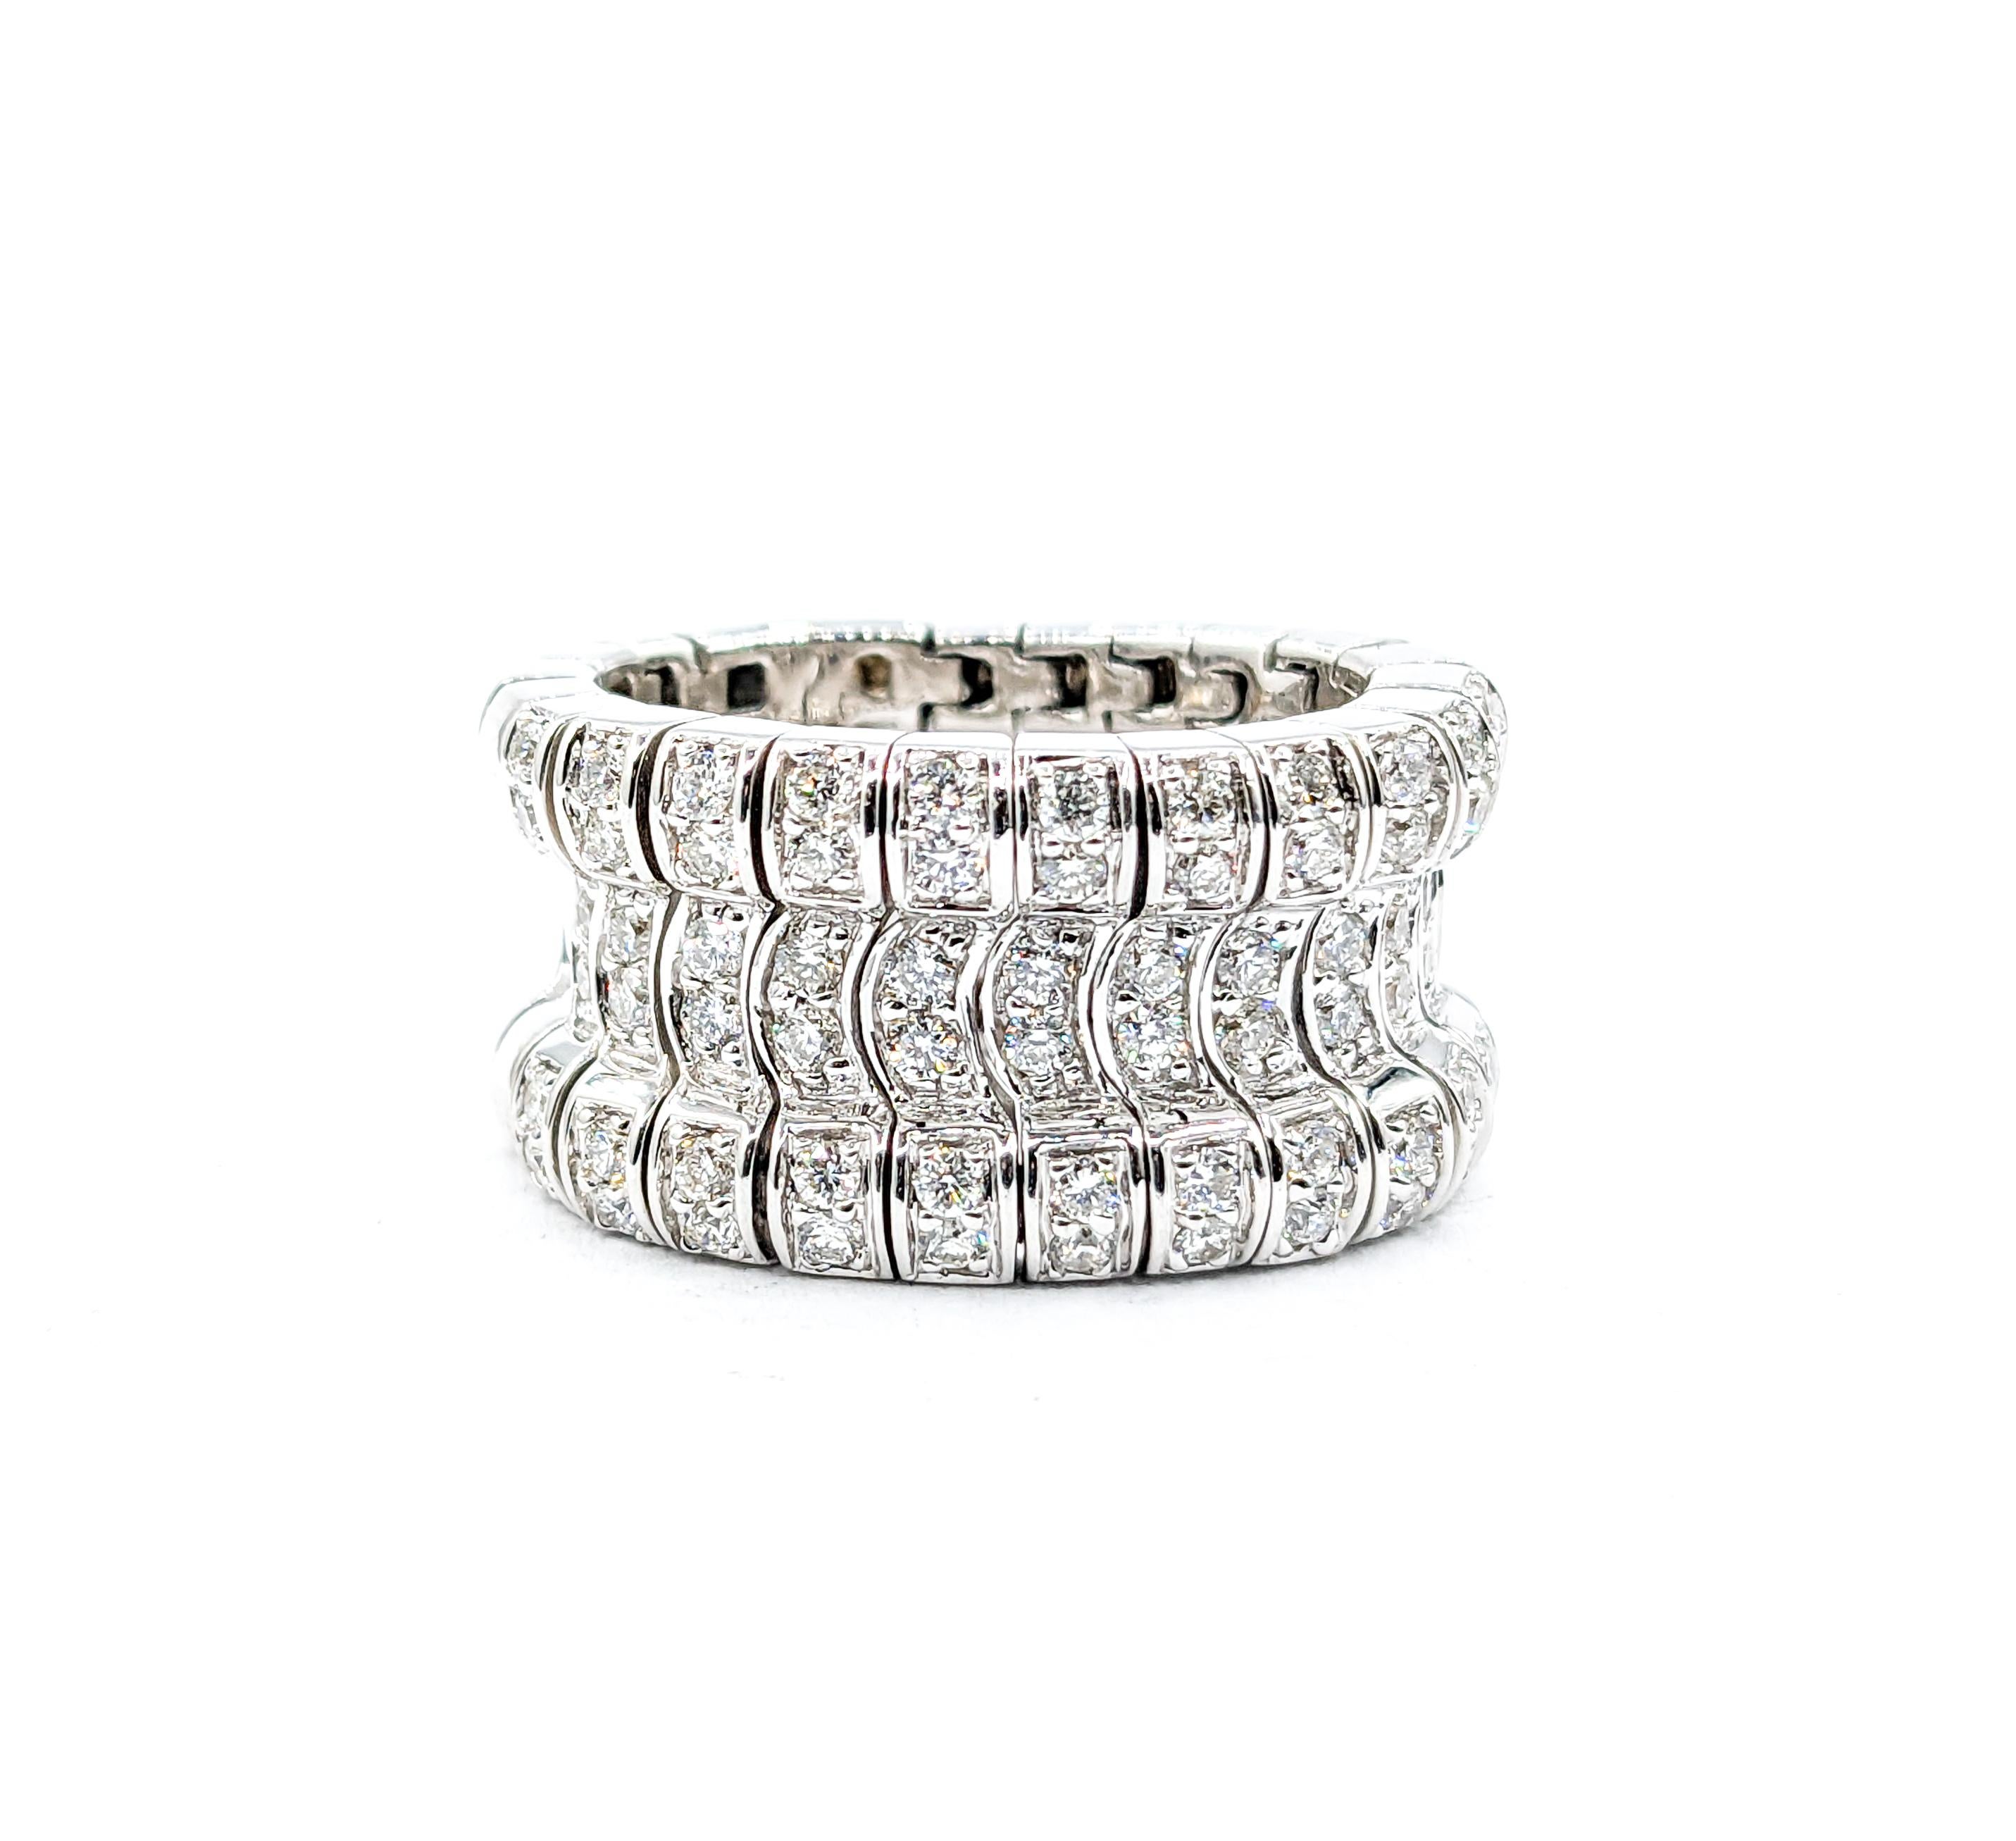 Sonia B Flex Diamond Ring In White Gold

Introducing the exquisite Sonia B Flex Ring, masterfully crafted in 14kt White Gold and adorned with 1.0ctw of Round Diamonds. These scintillating diamonds, boasting SI clarity and a near colorless white hue,